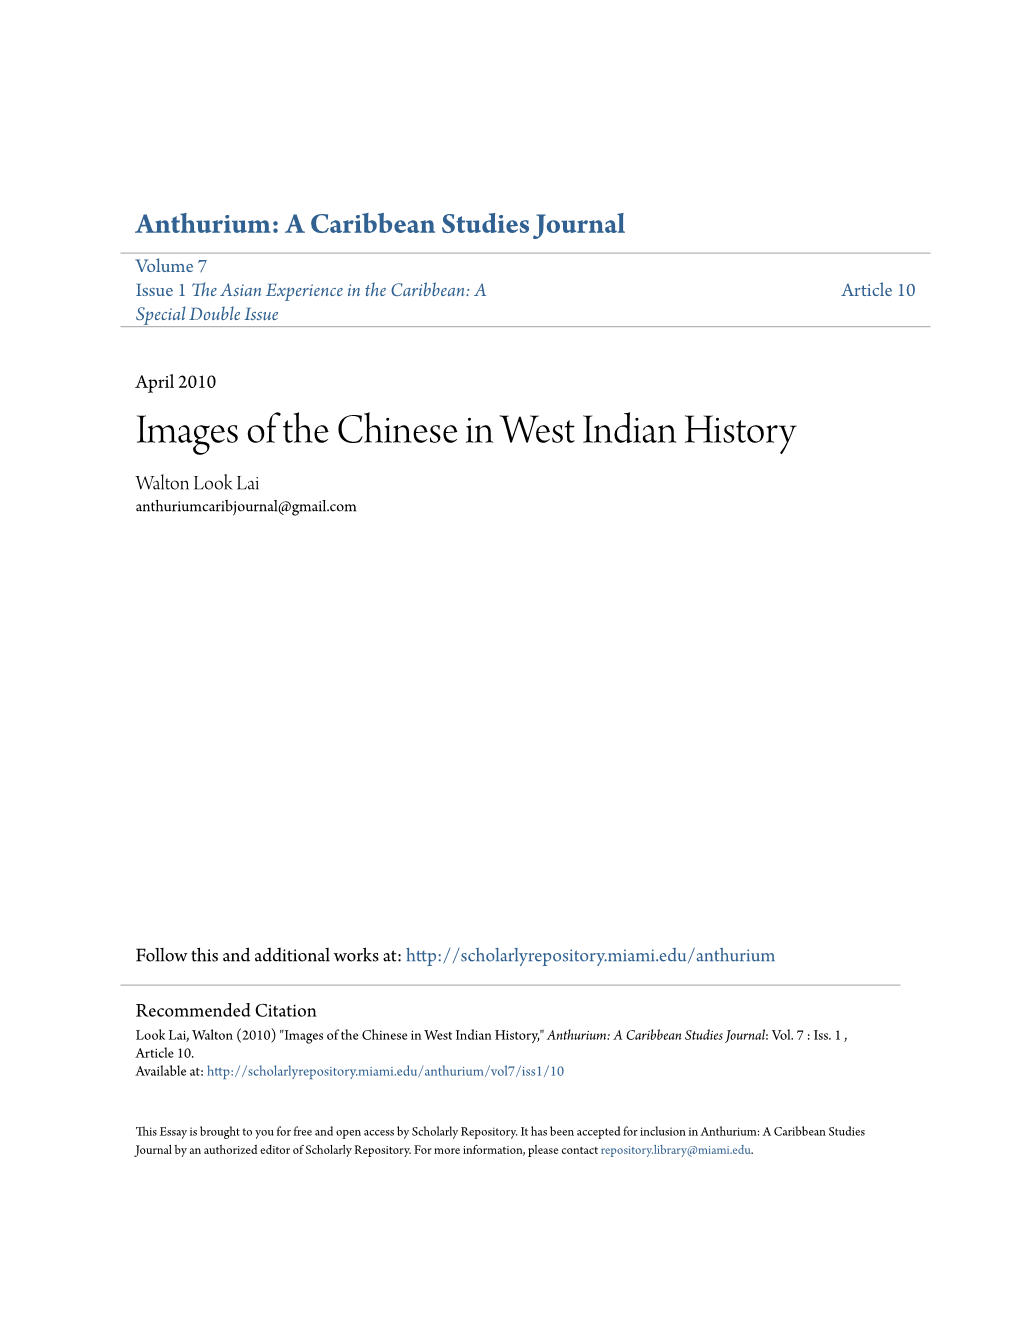 Images of the Chinese in West Indian History Walton Look Lai Anthuriumcaribjournal@Gmail.Com